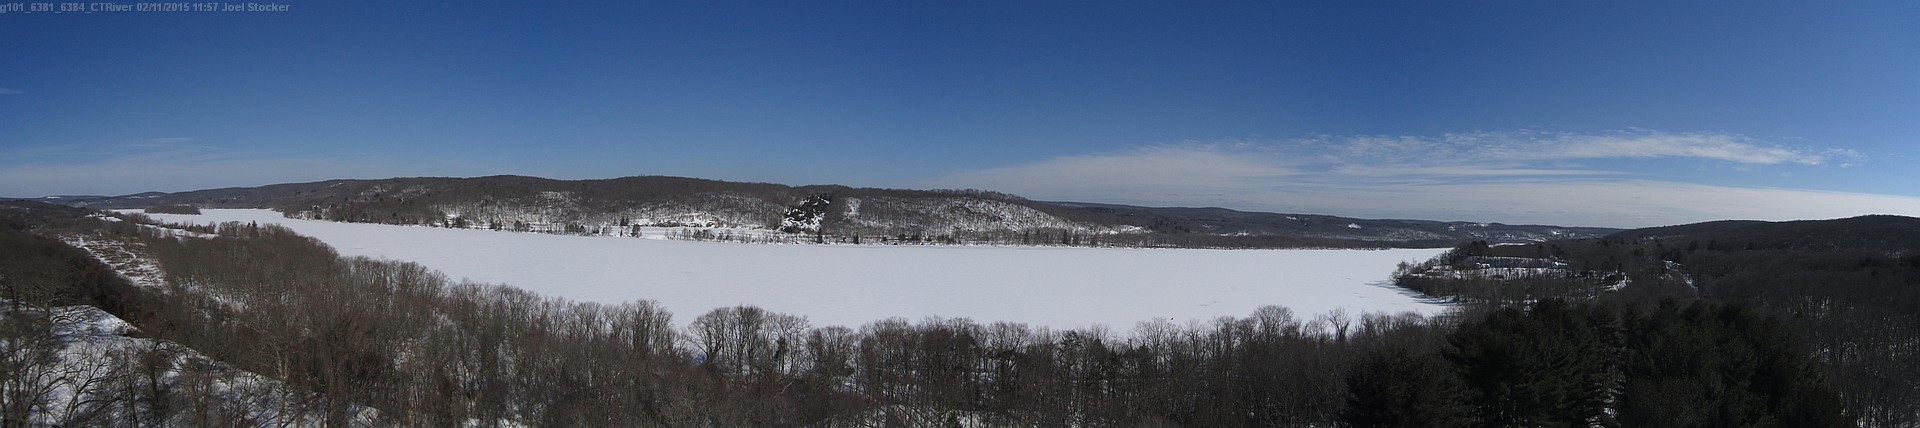 A picture of the frozen-over Connecticut River taken by Joel Stocker's drone in its latest flight.